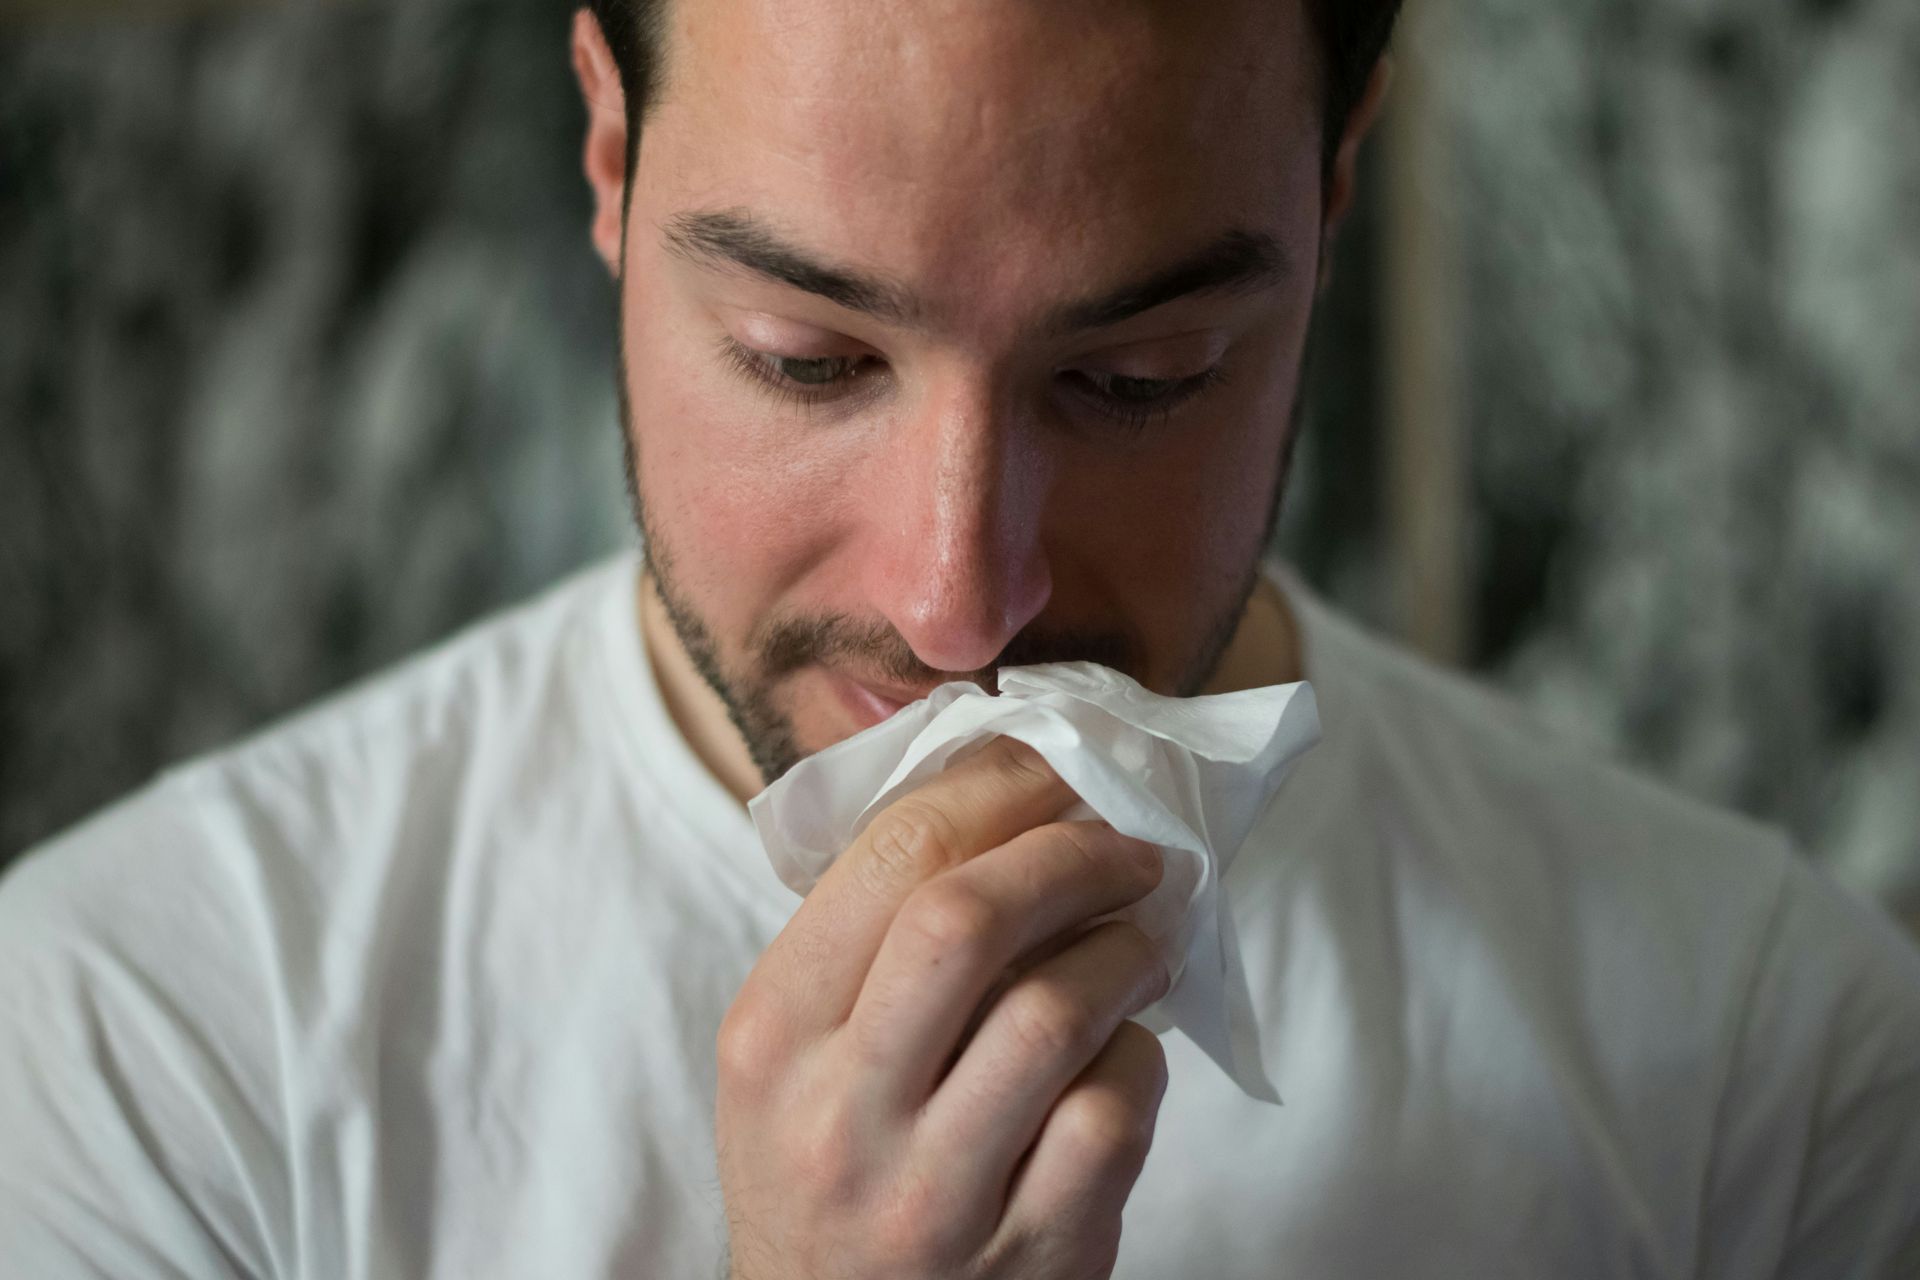 Image shows a person with a tissue in his nose, symbolizing relief from cold and flu symptoms